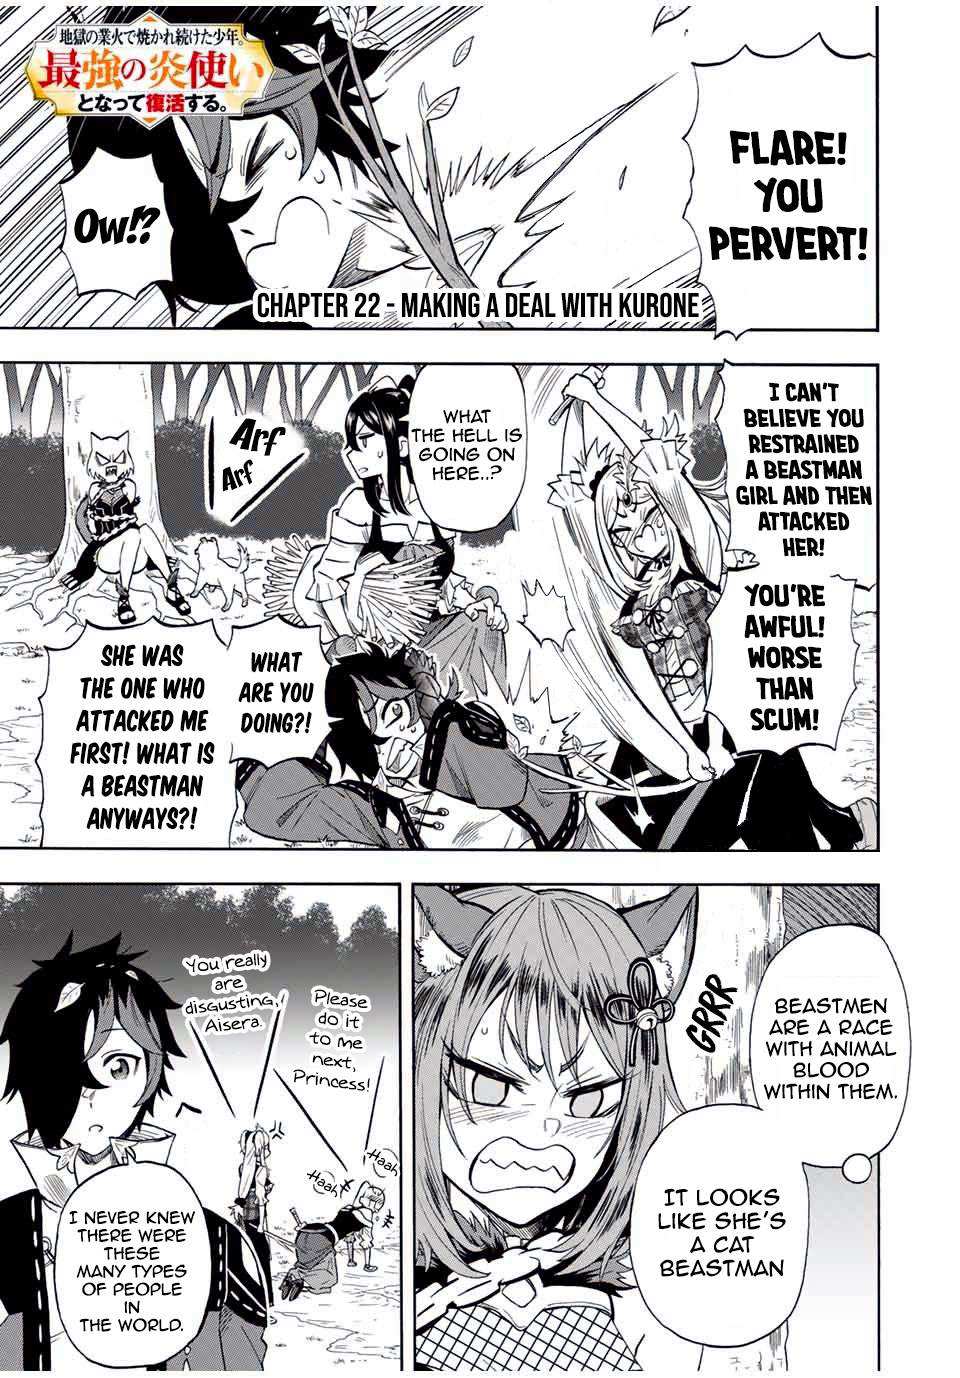 The Boy Who Had Been Continuously Burned By The Fires Of Hell. Revived, He Becomes The Strongest Flame User. - Page 2